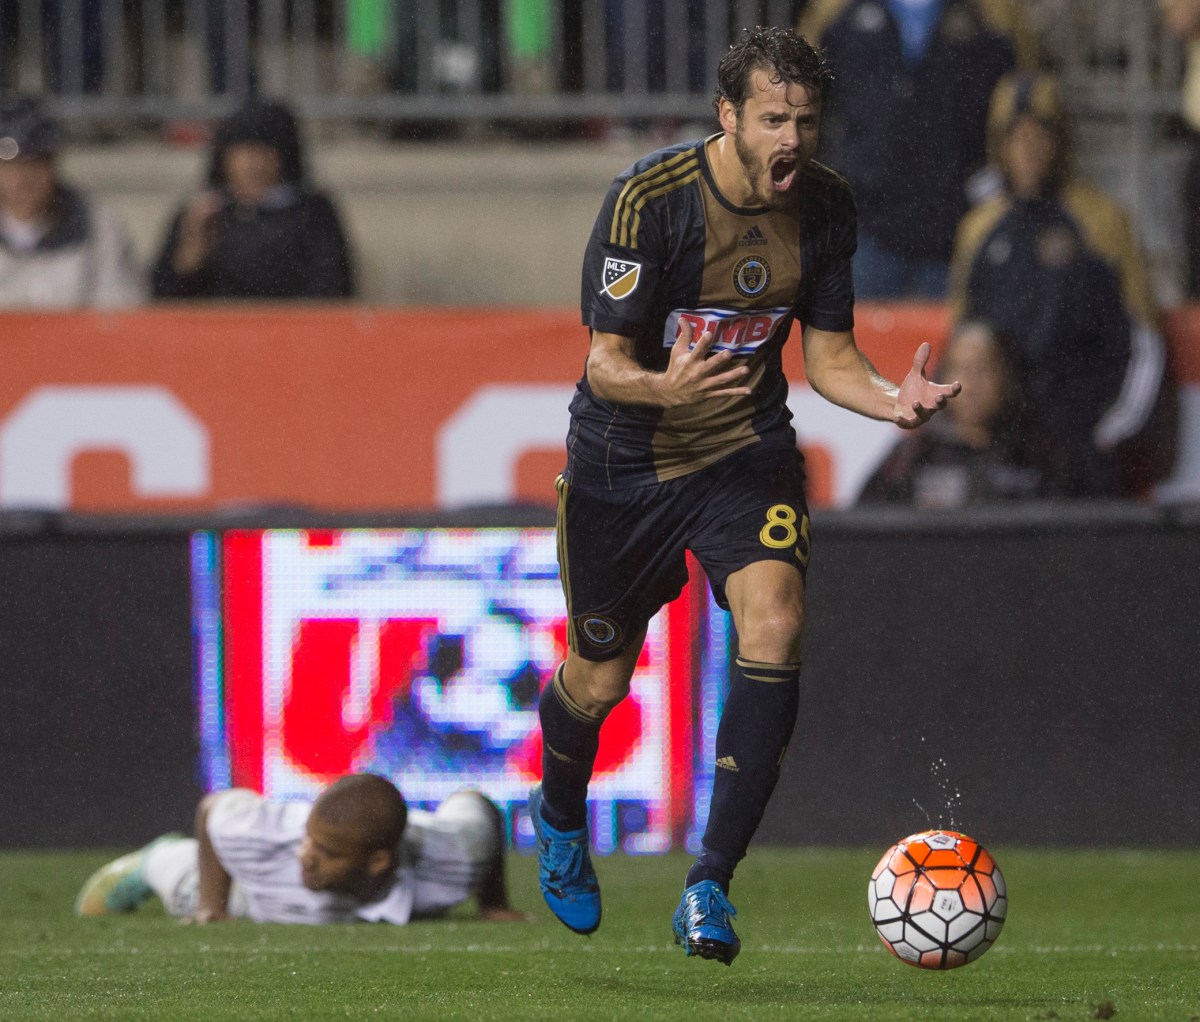 Philly Union will have retooled offense in 2016